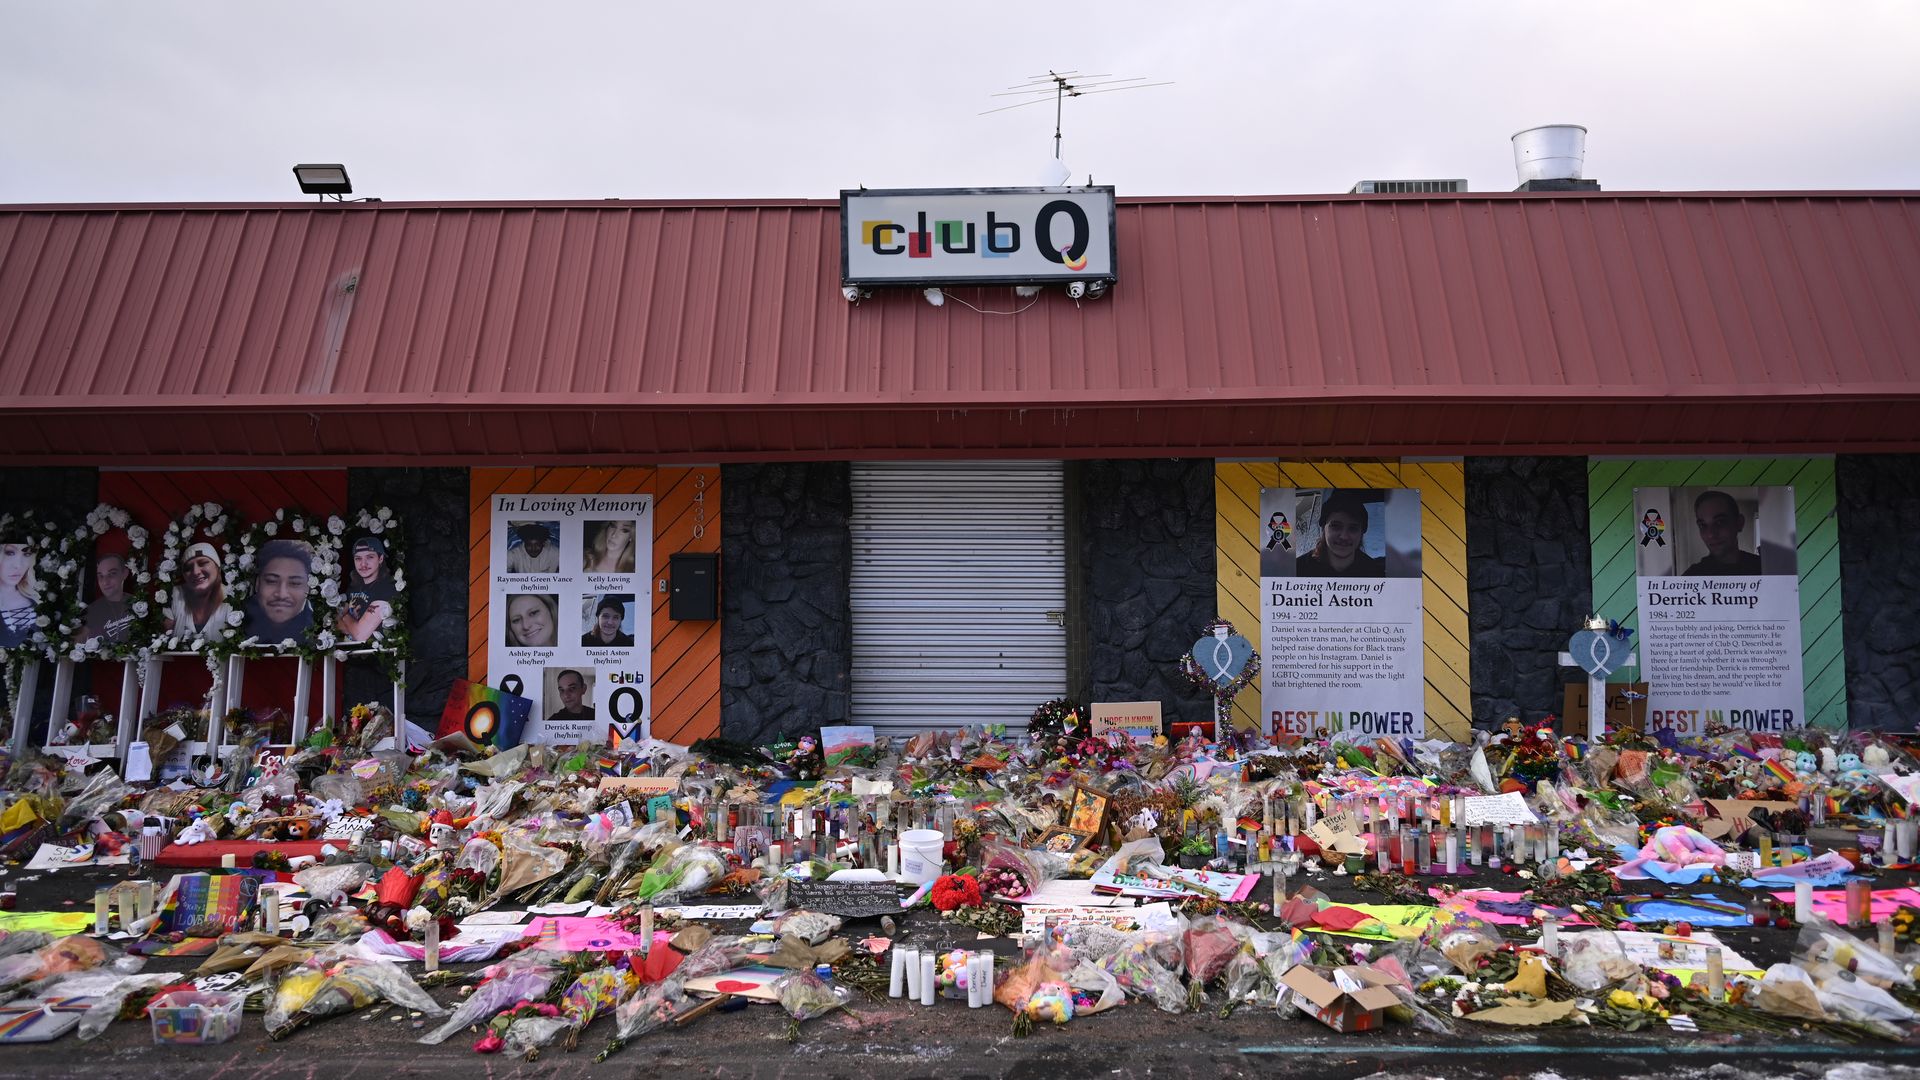 Club Q and the memorial for the victims of the shooting photographed in Colorado Springs, Colorado